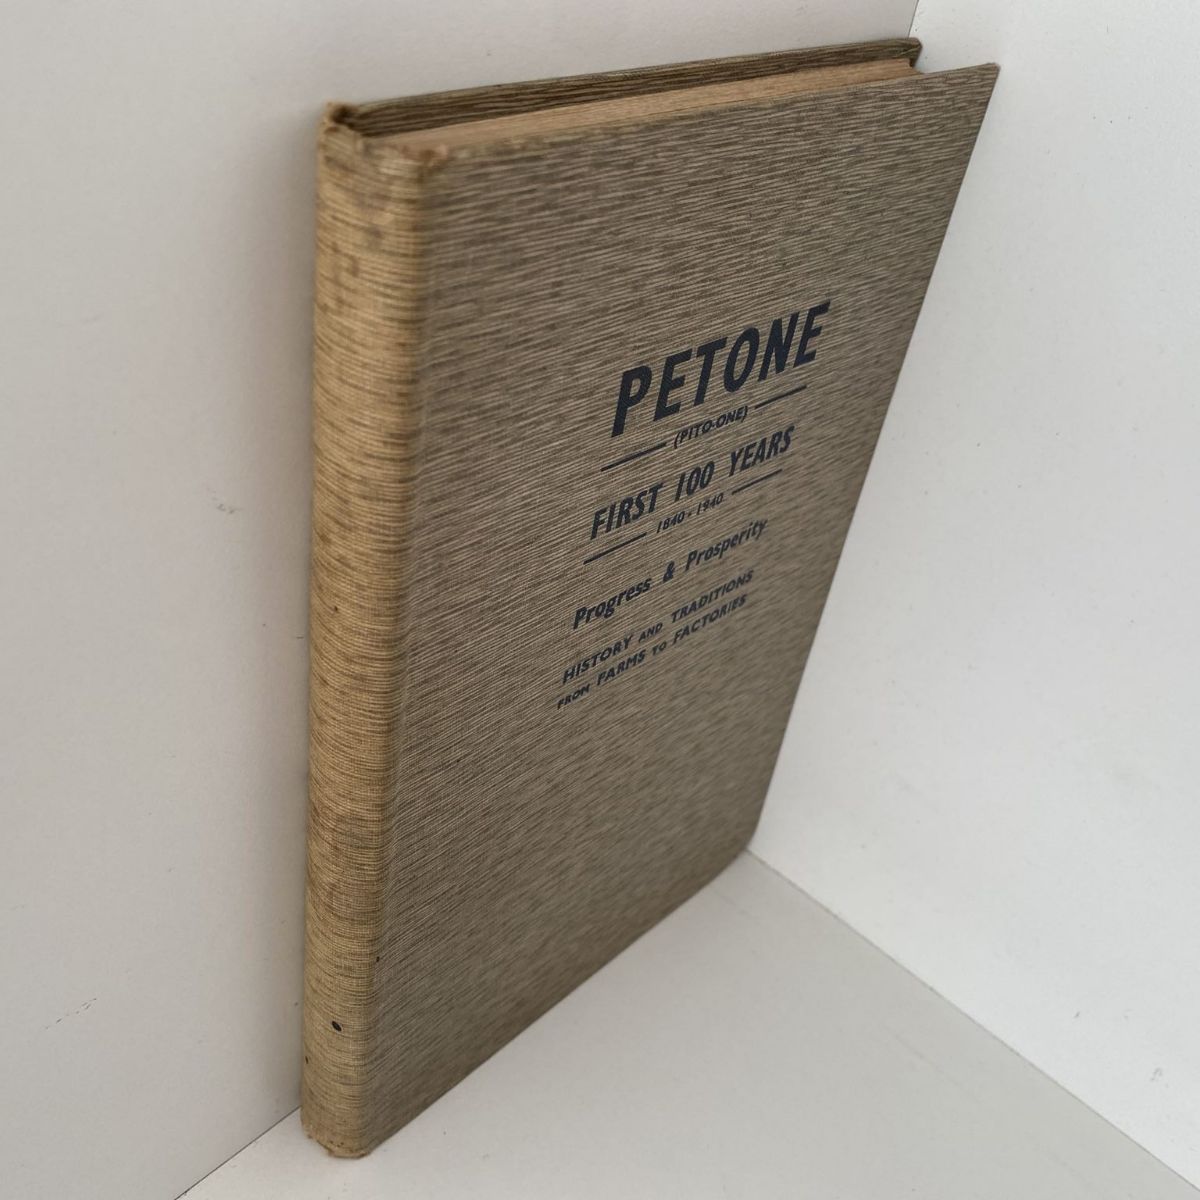 PETONE: History and Traditions of the First 100 Years 1840 -1940